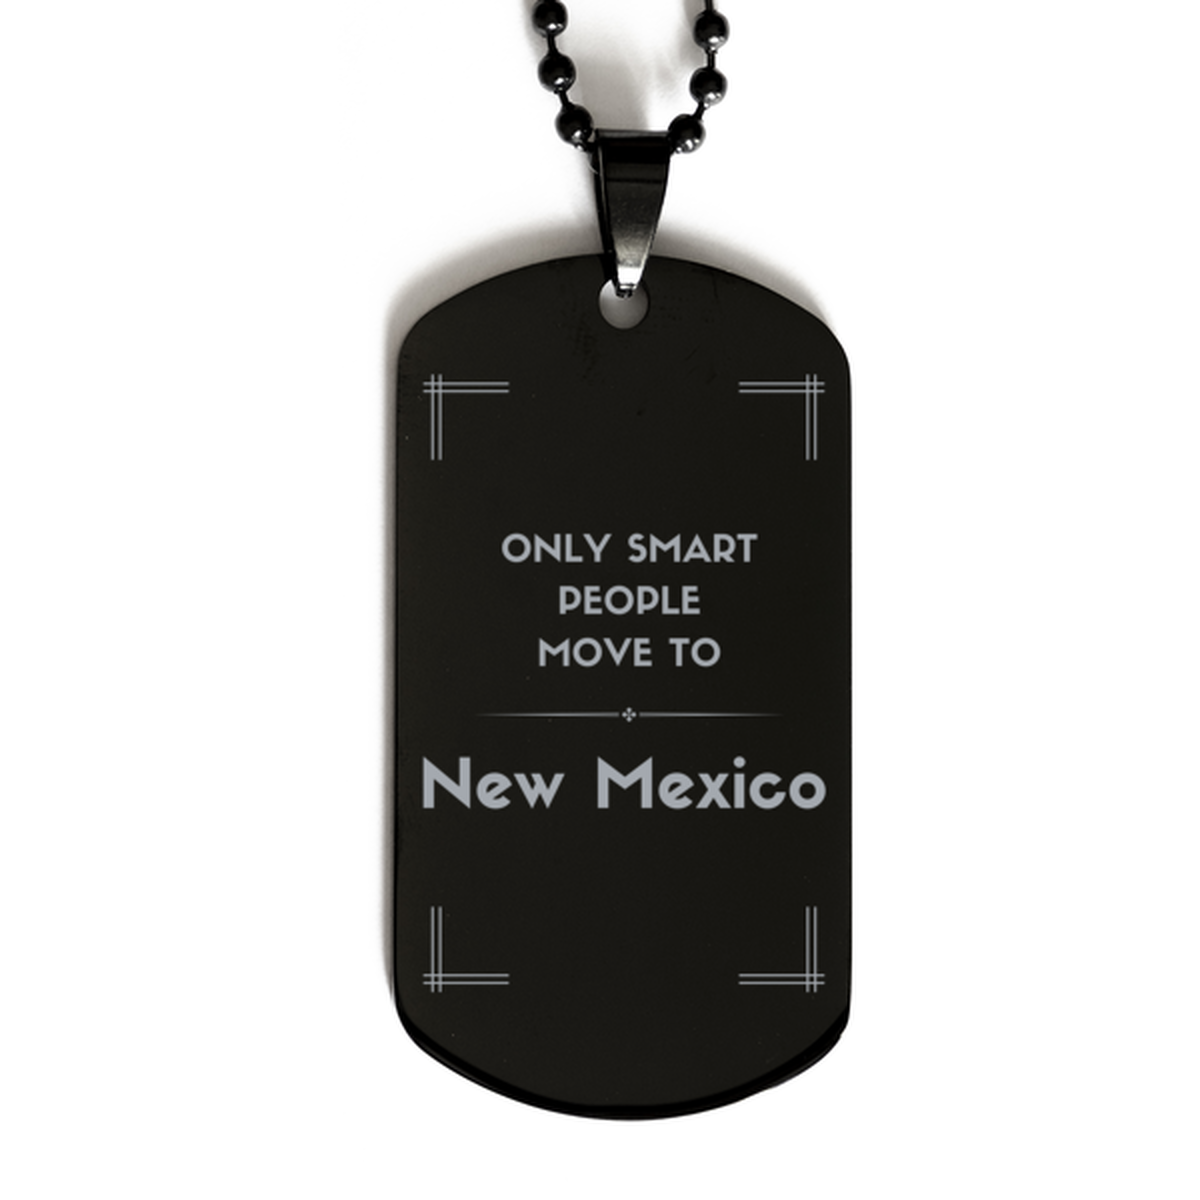 Only smart people move to New Mexico Black Dog Tag, Gag Gifts For New Mexico, Move to New Mexico Gifts for Friends Coworker Funny Saying Quote